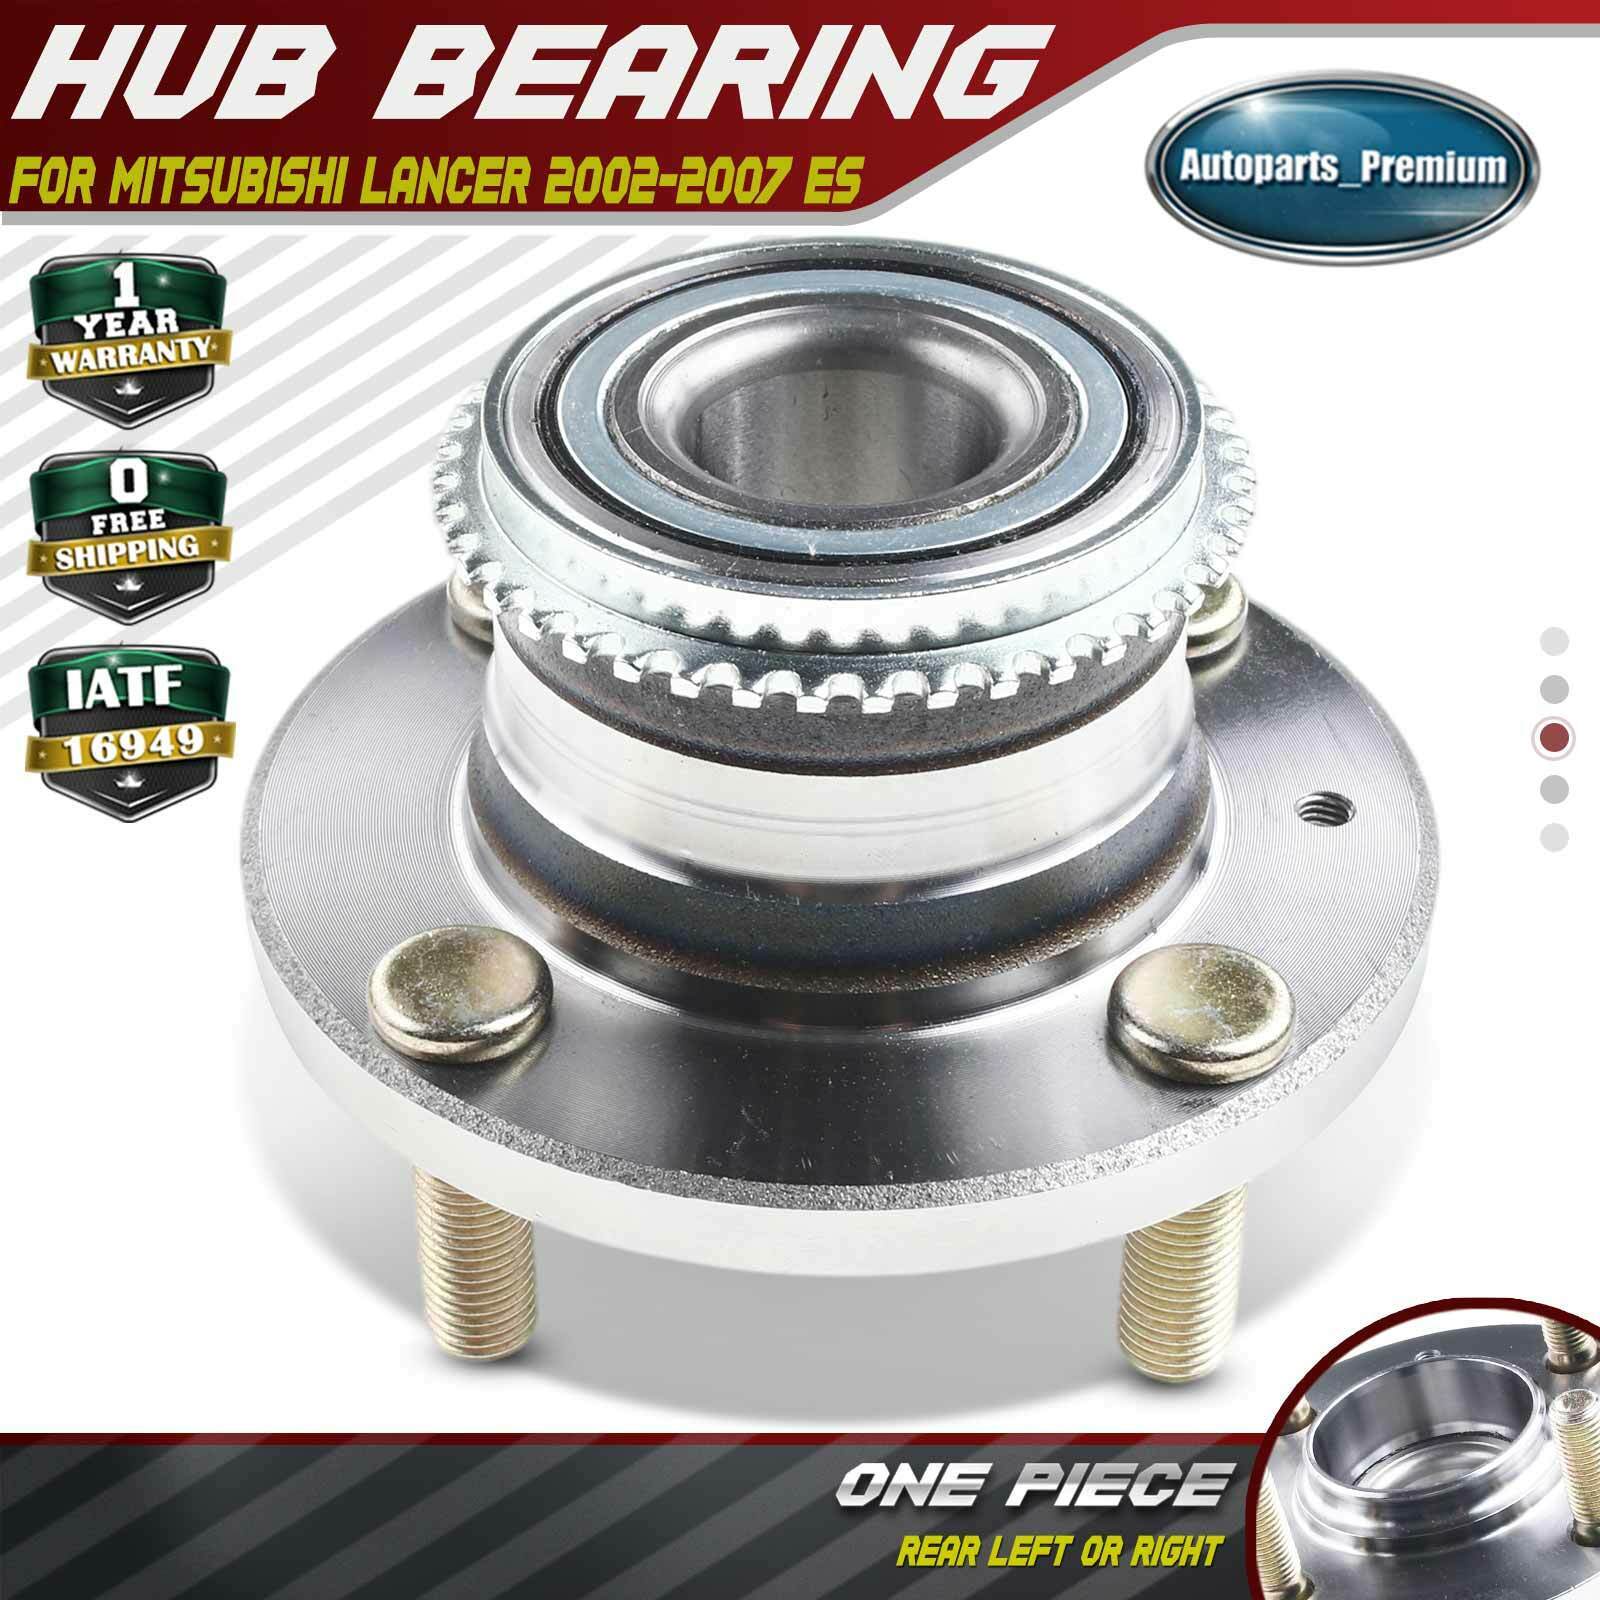 Rear Left or Right Wheel Hub Bearing Assembly for Mitsubishi Lancer 2002-2007 ES